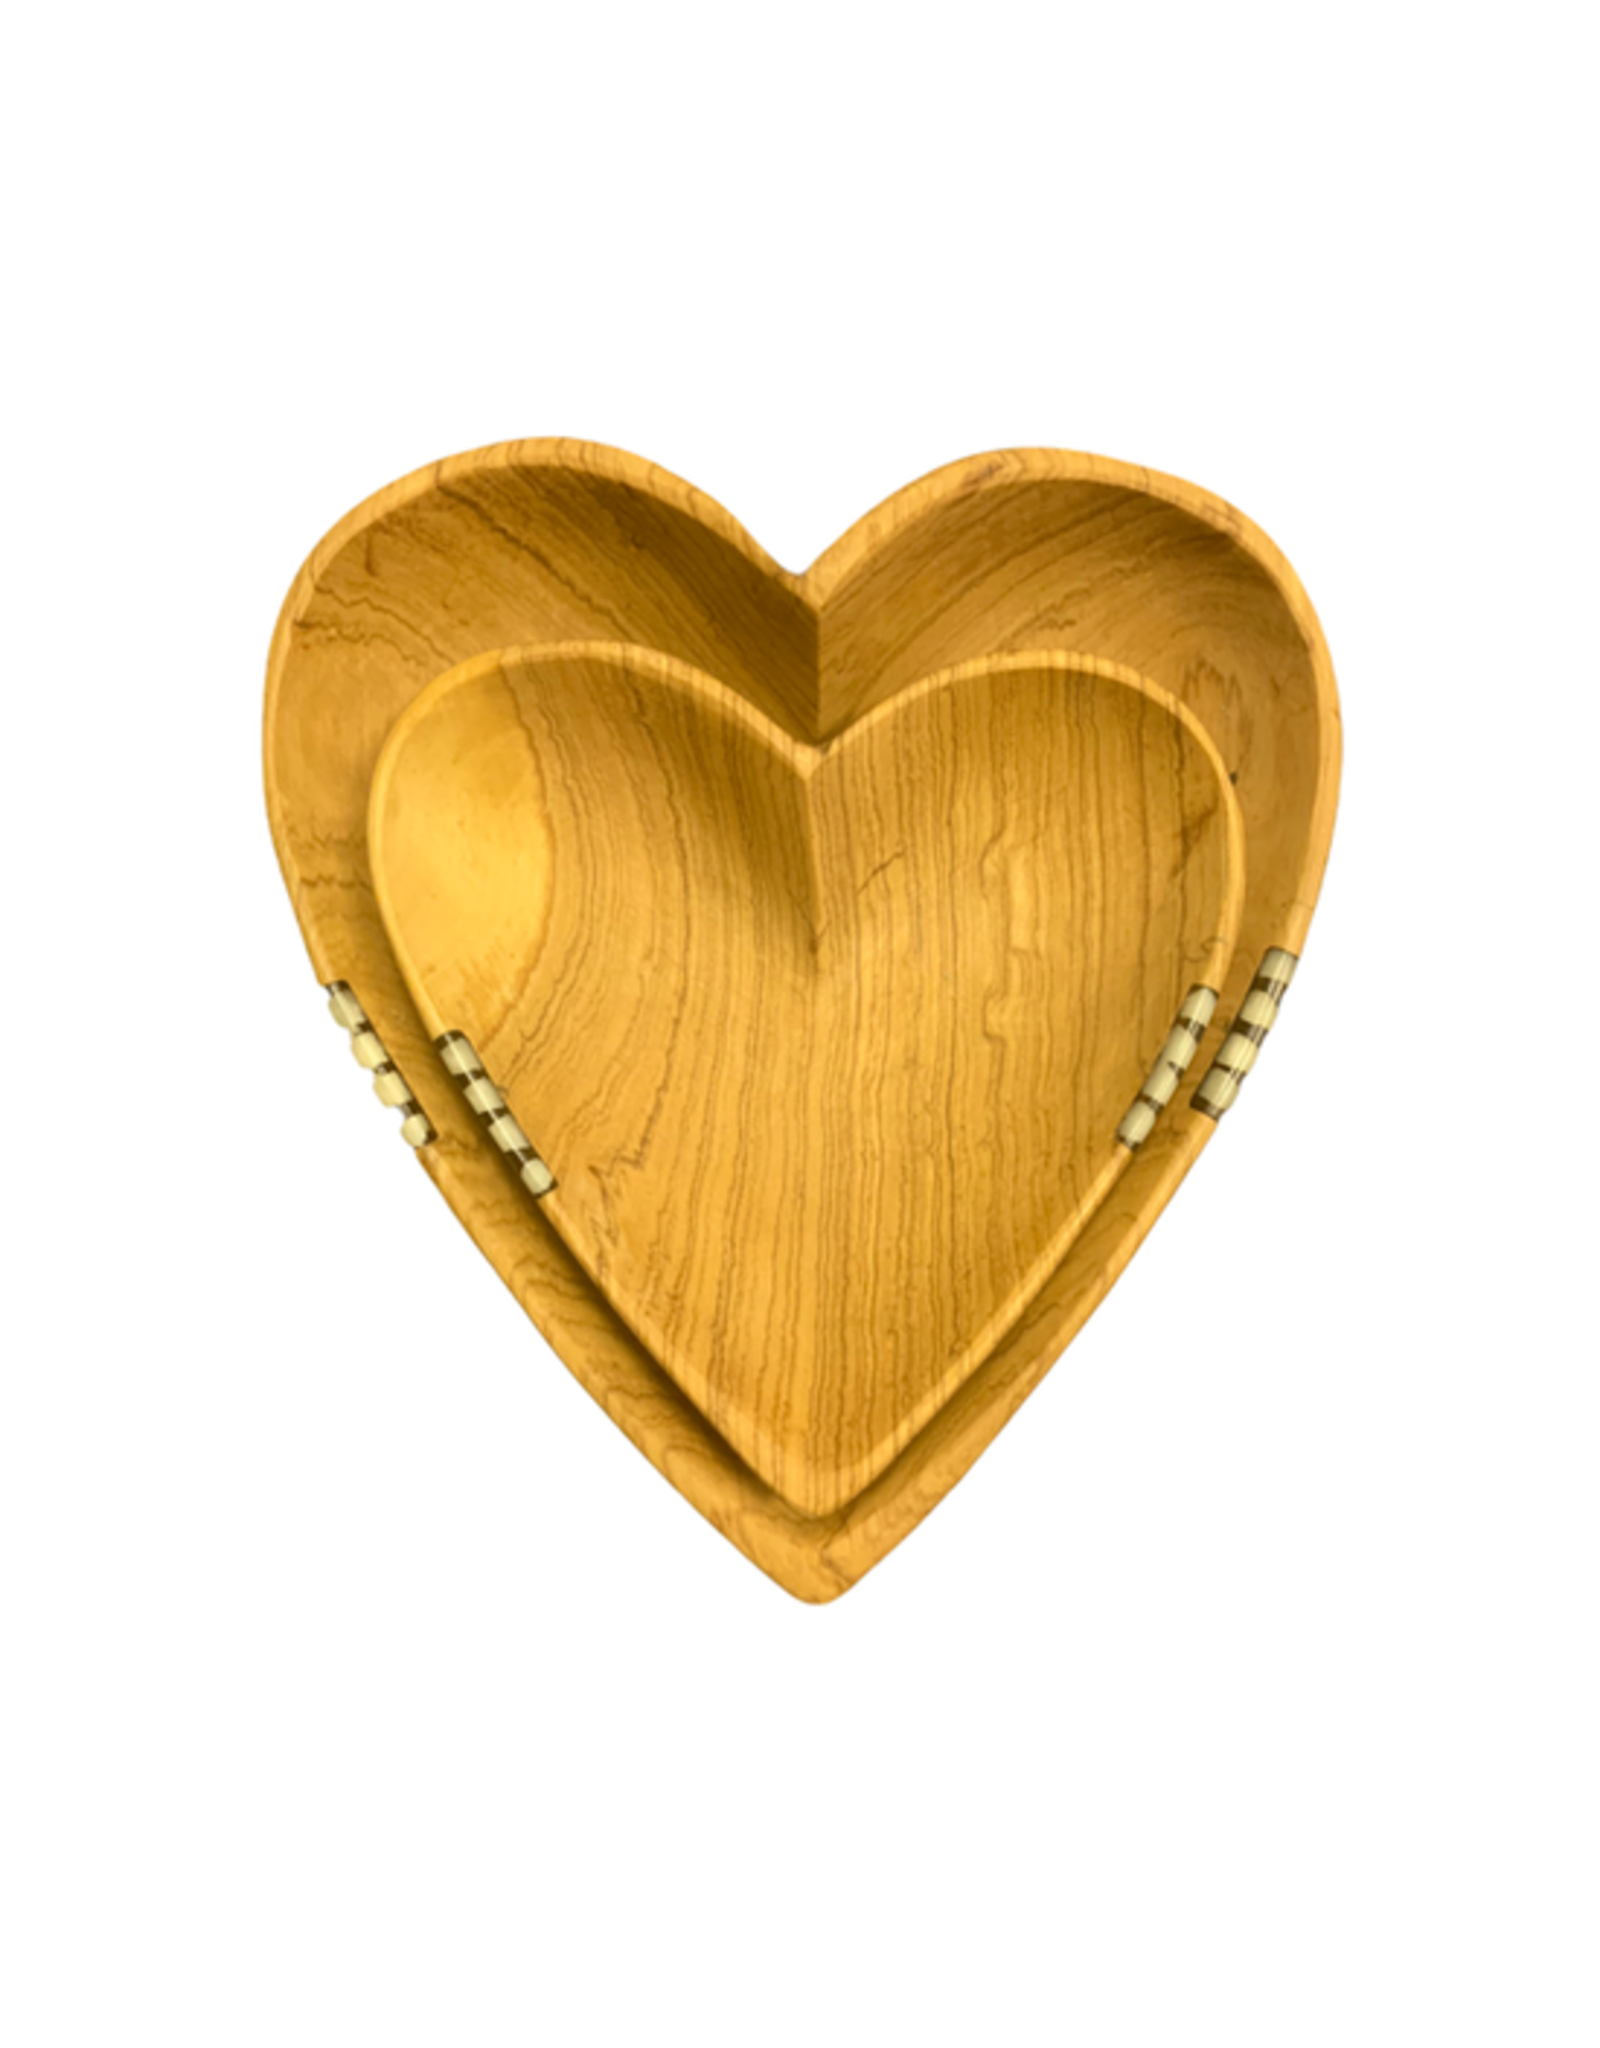 Trade roots Olive Wood Heart Bowl, 8"